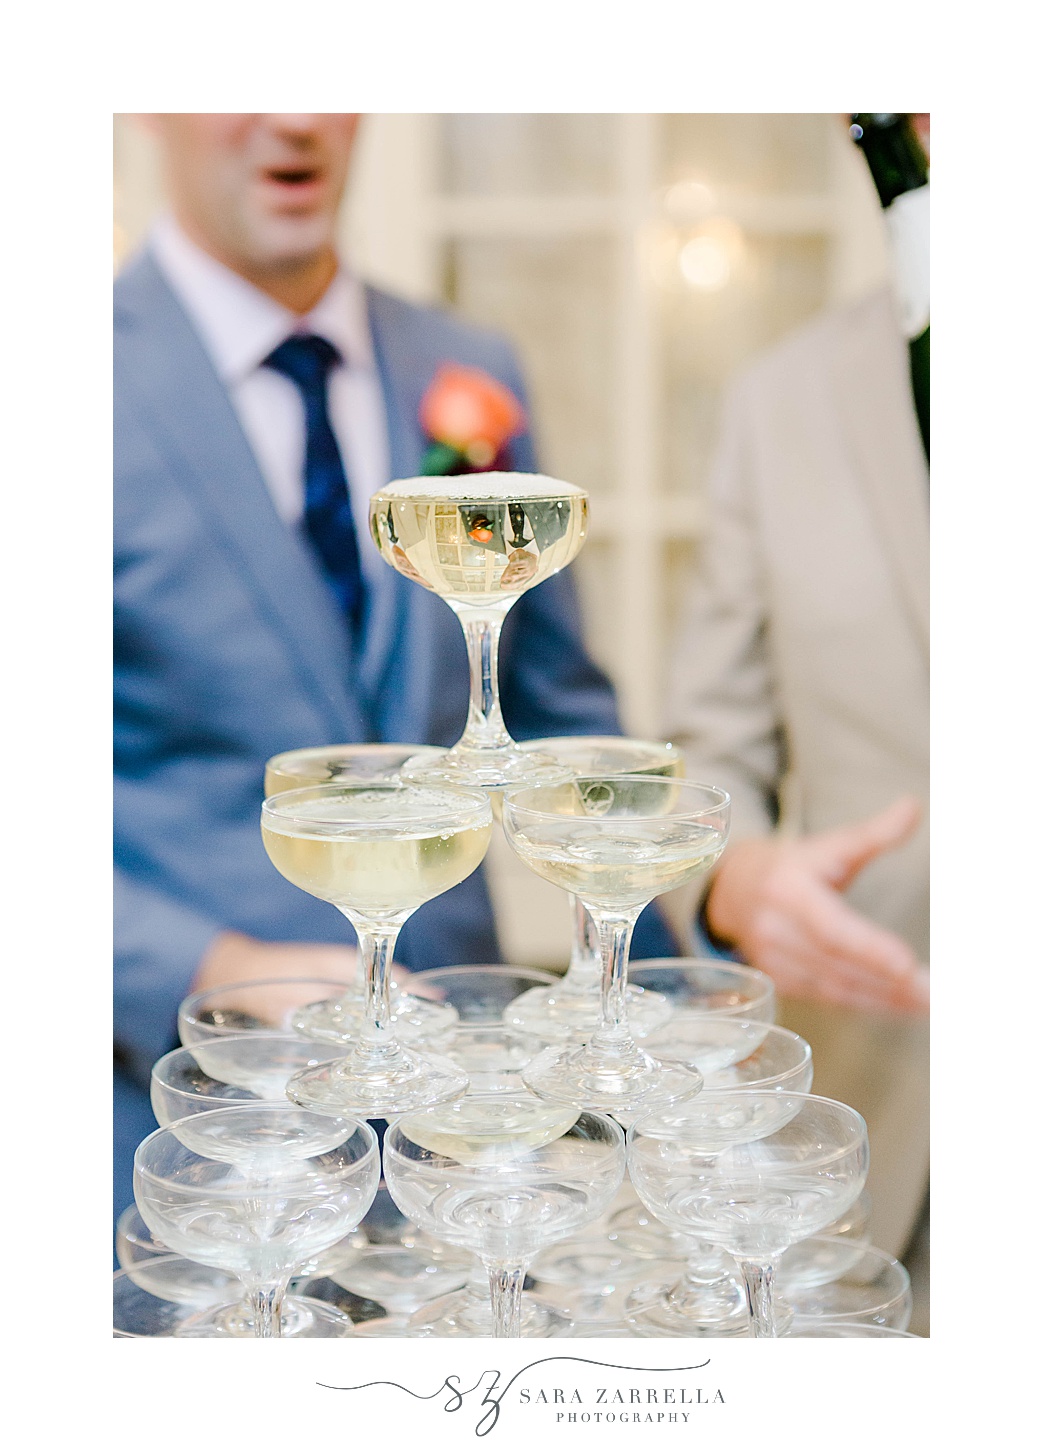 champagne tower for Gatsby inspired wedding reception